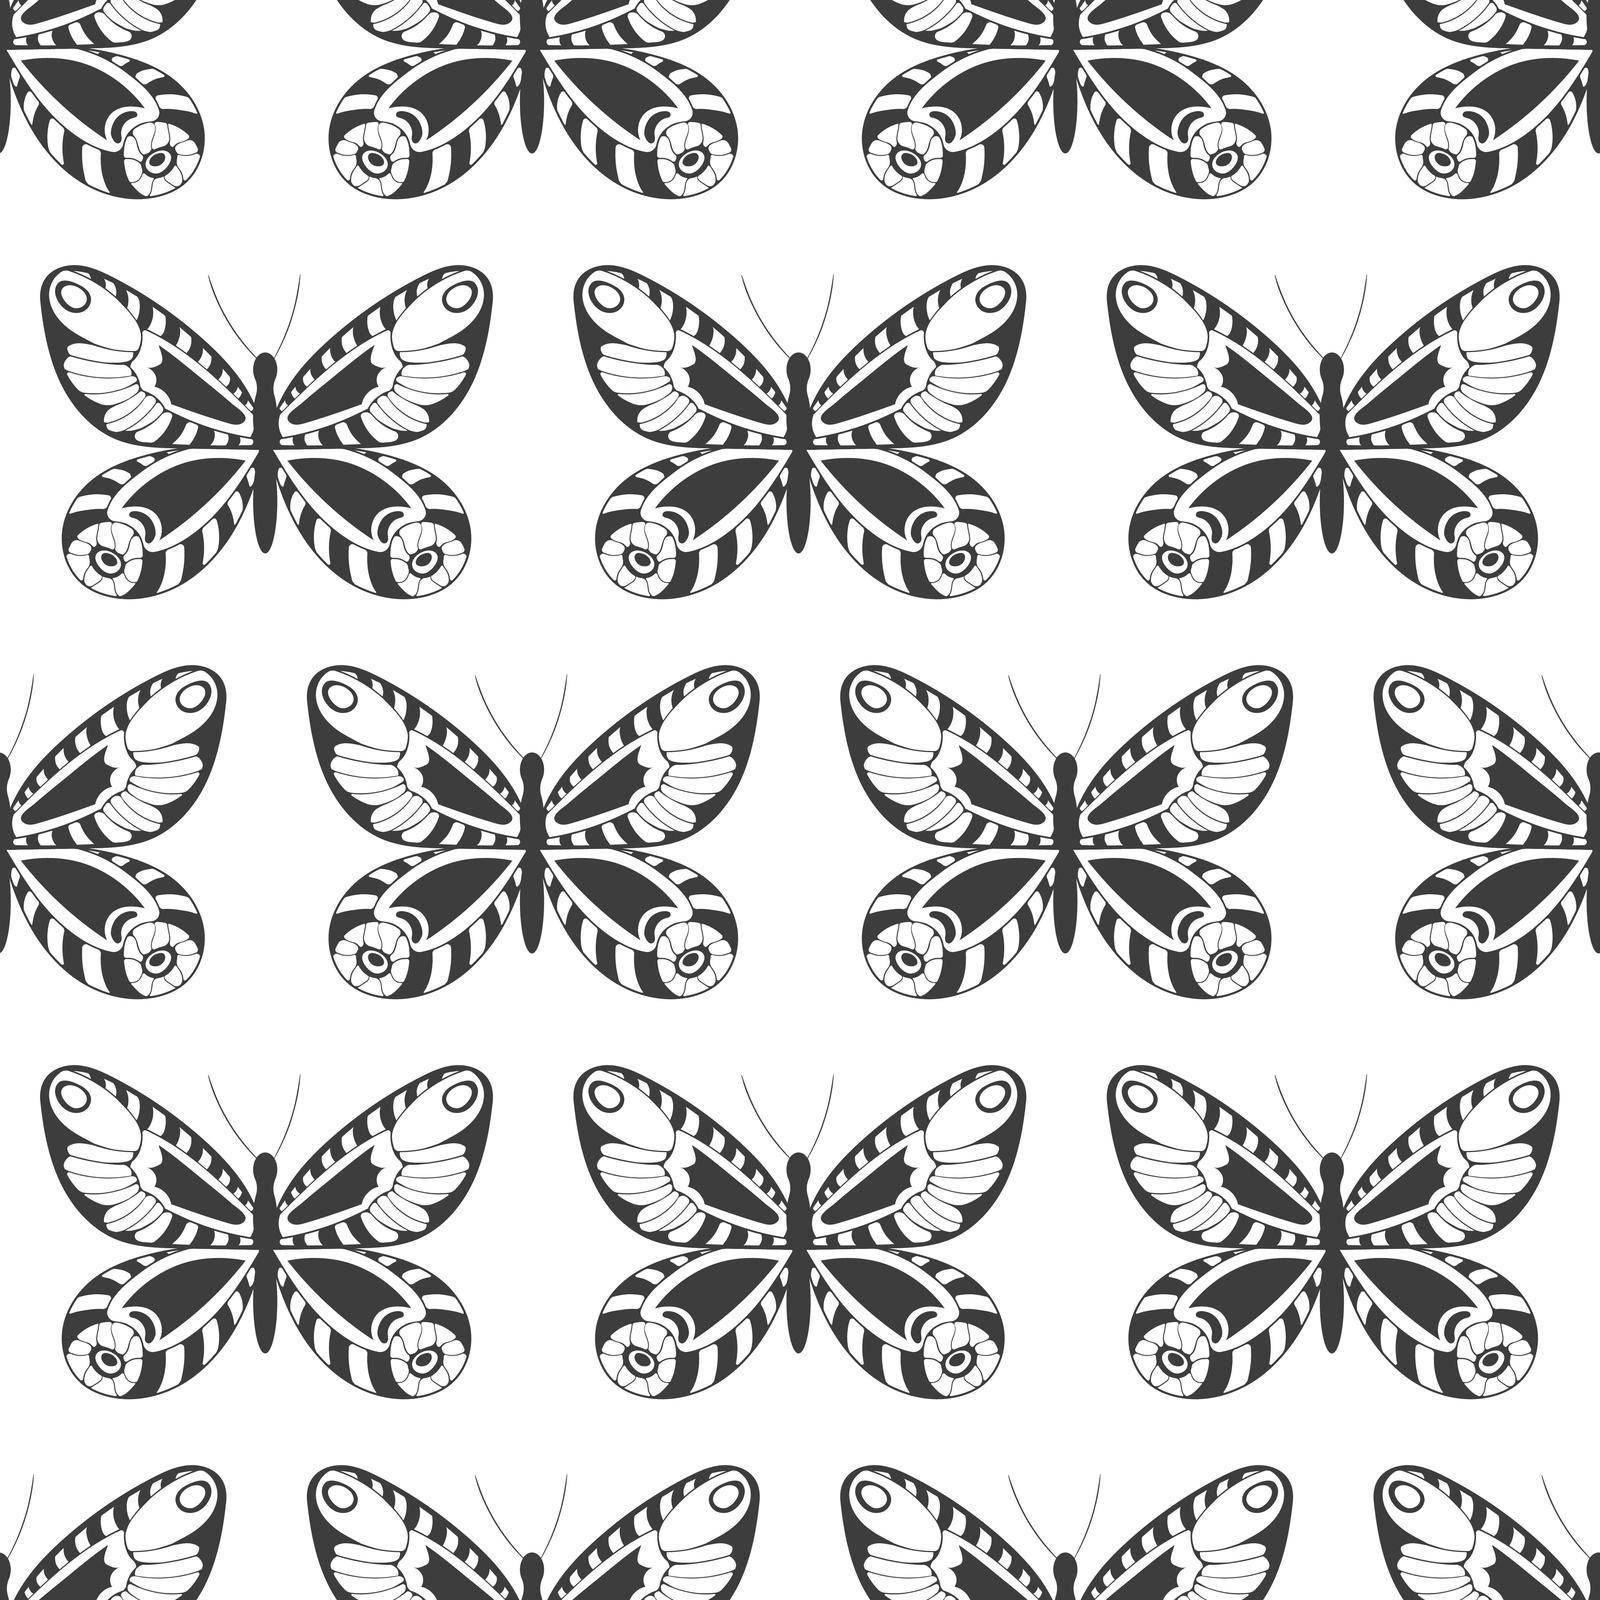 Seamless pattern with black silhouettes of butterflies isolated on a white background. Simple monochrome abstract outline design